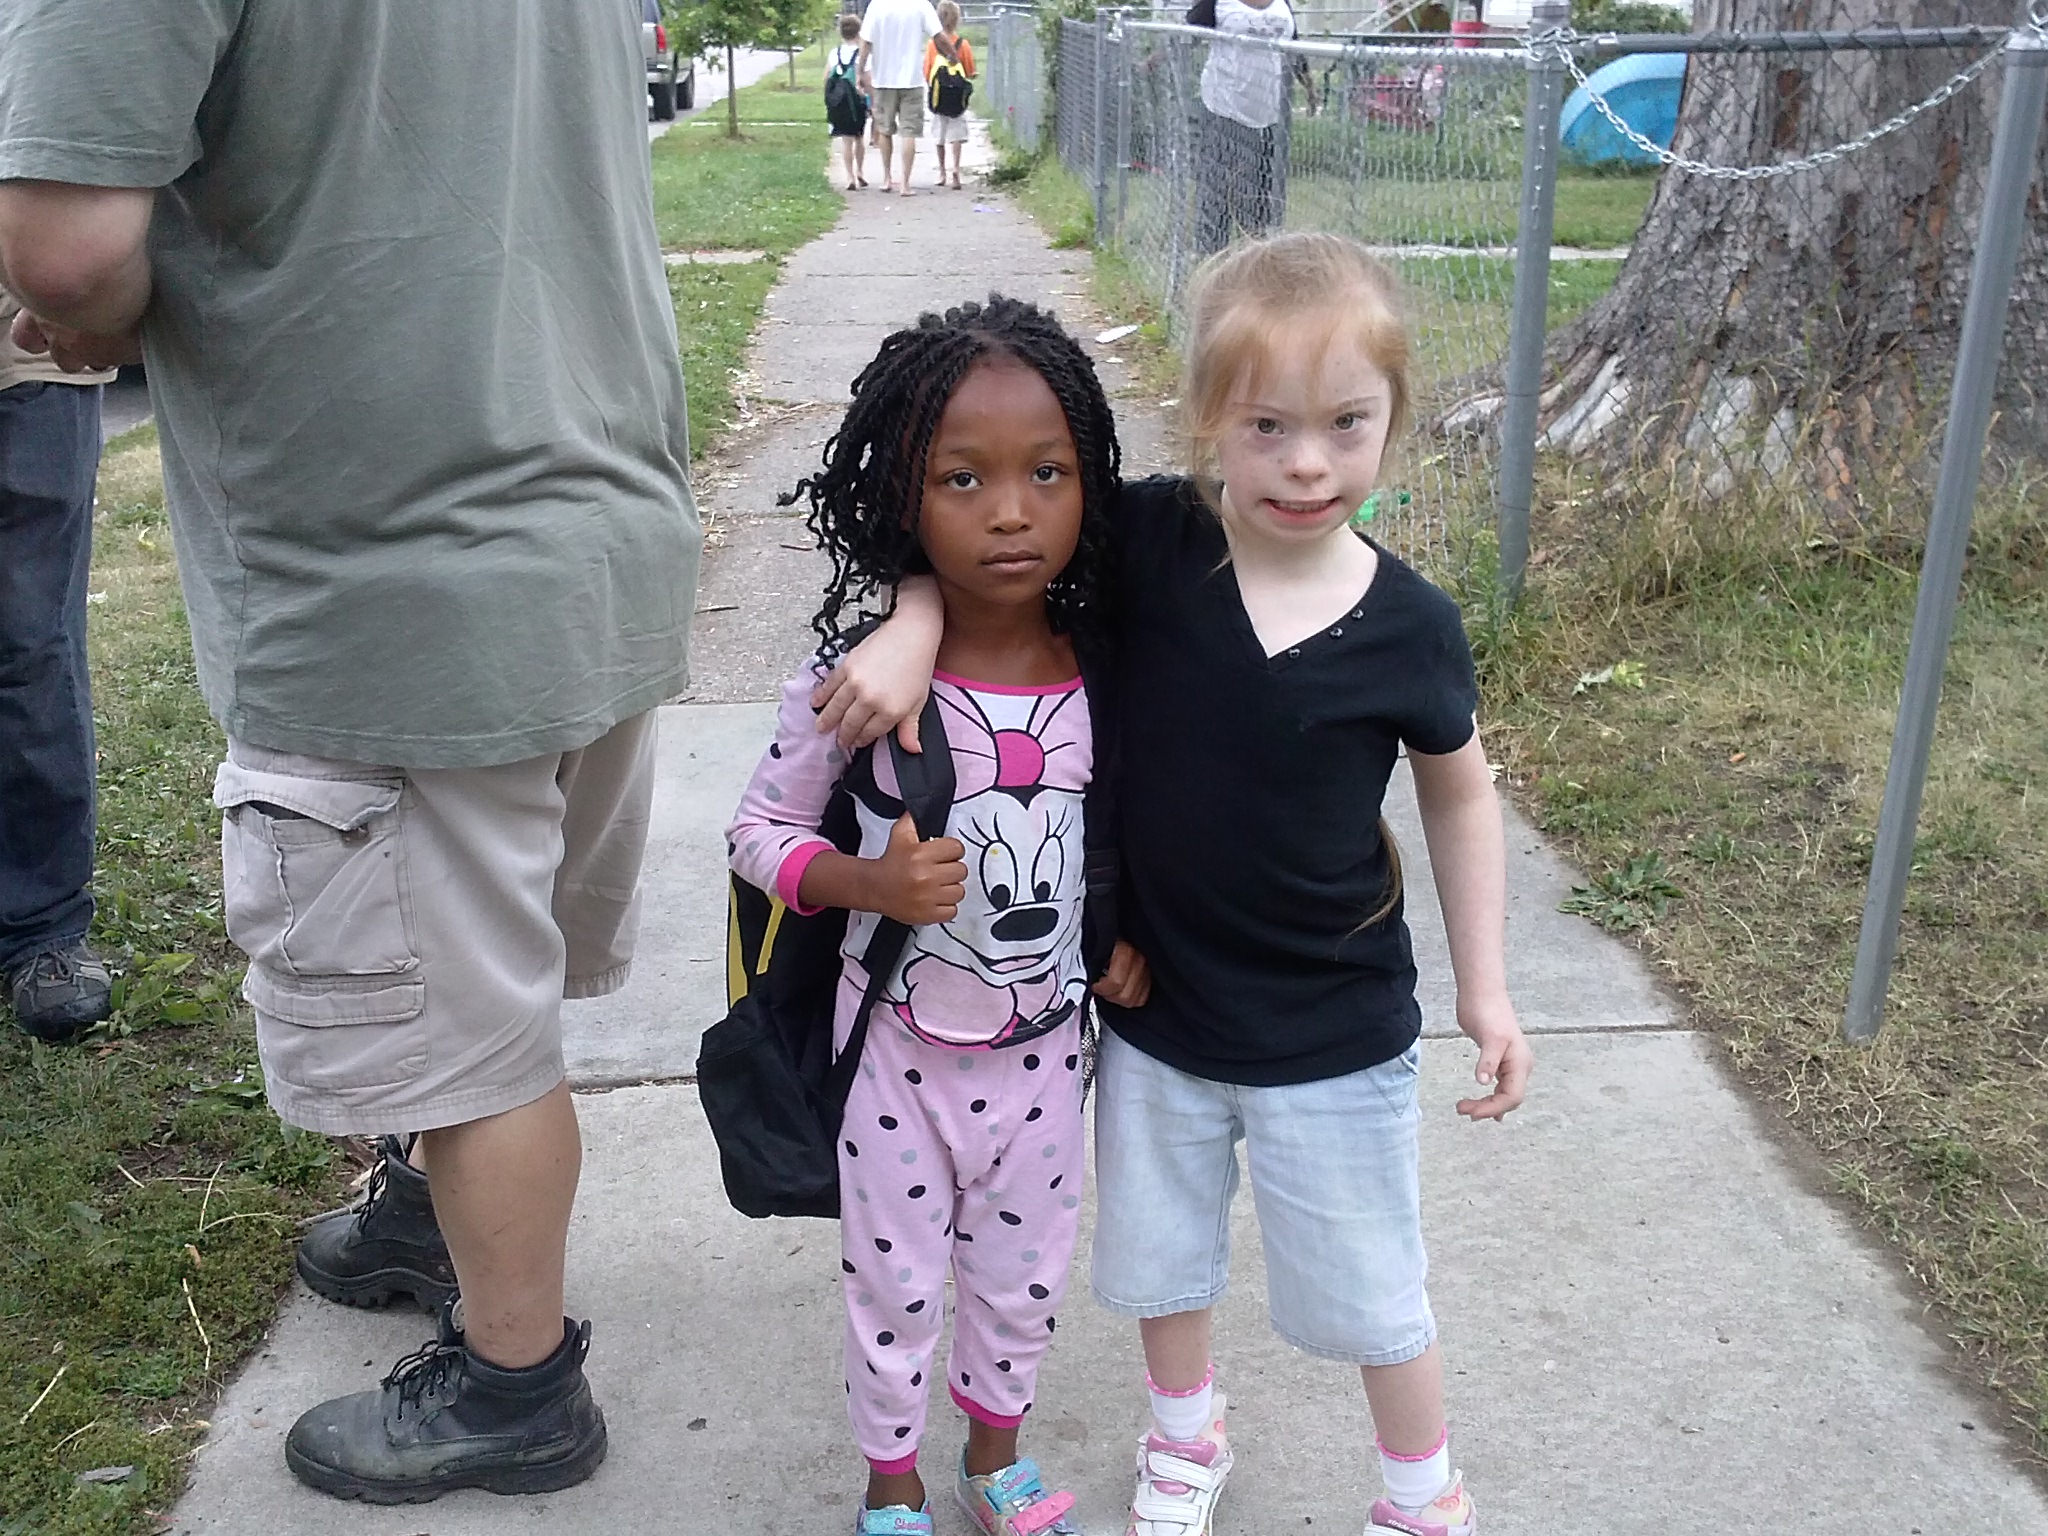 Hadassah & girl at PowerPack outreach in North Minneapolis, August 2014